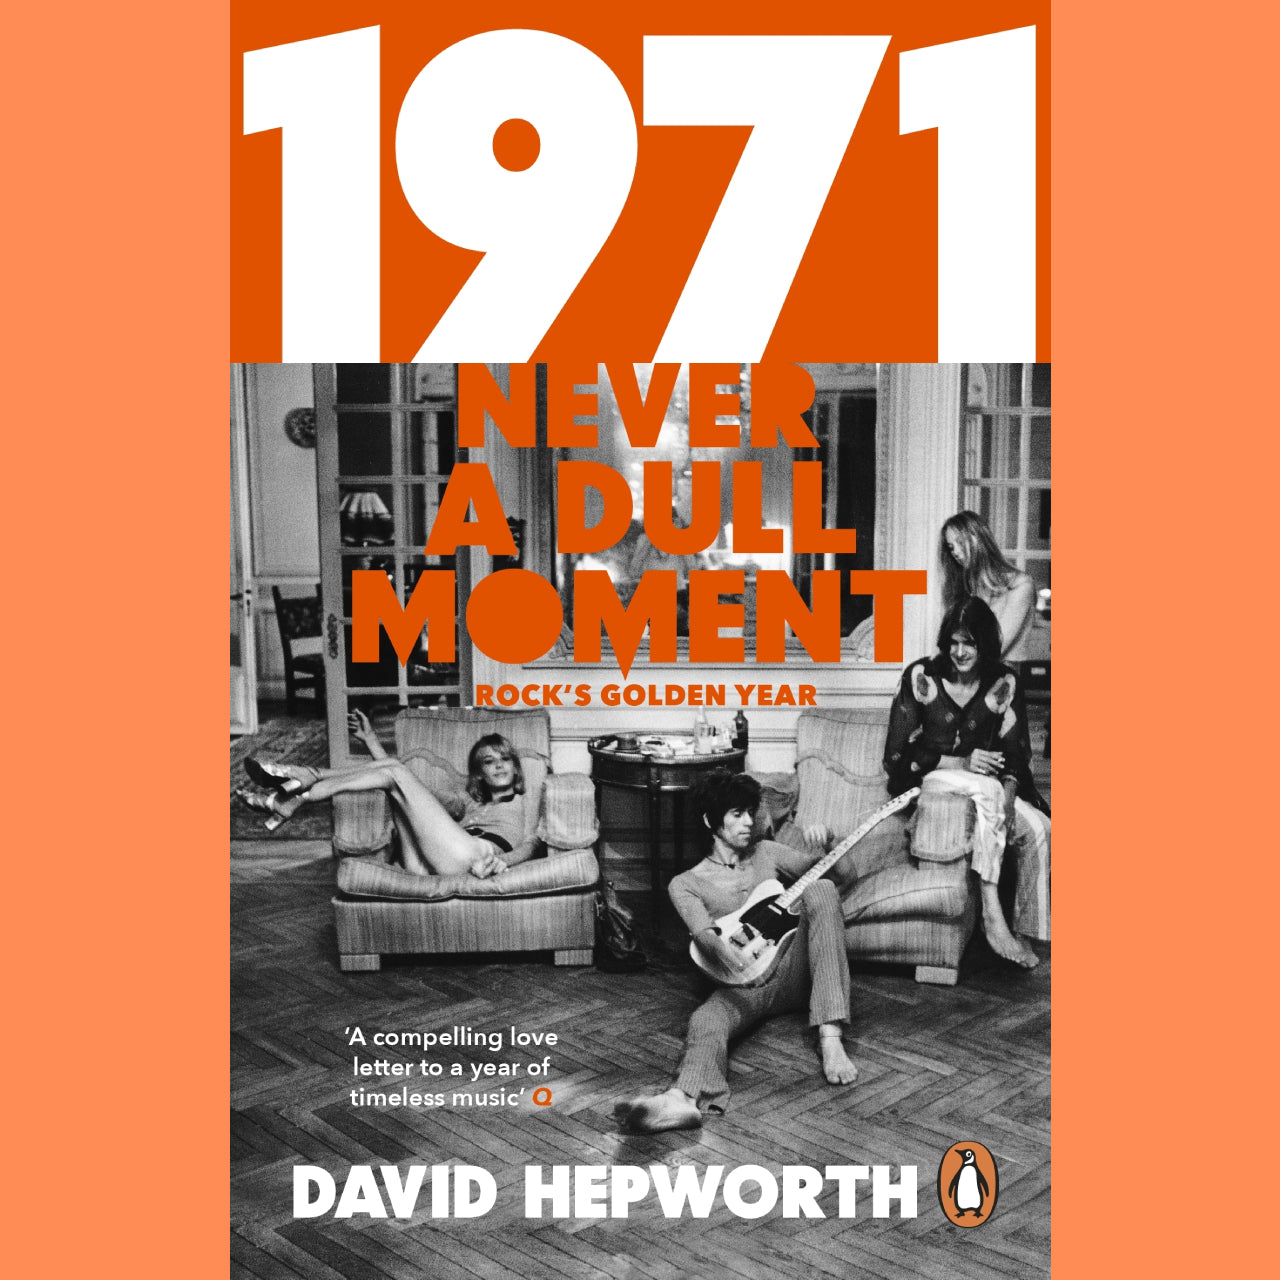 David Hepworth - 1971: Never a Dull Moment | Buy the book